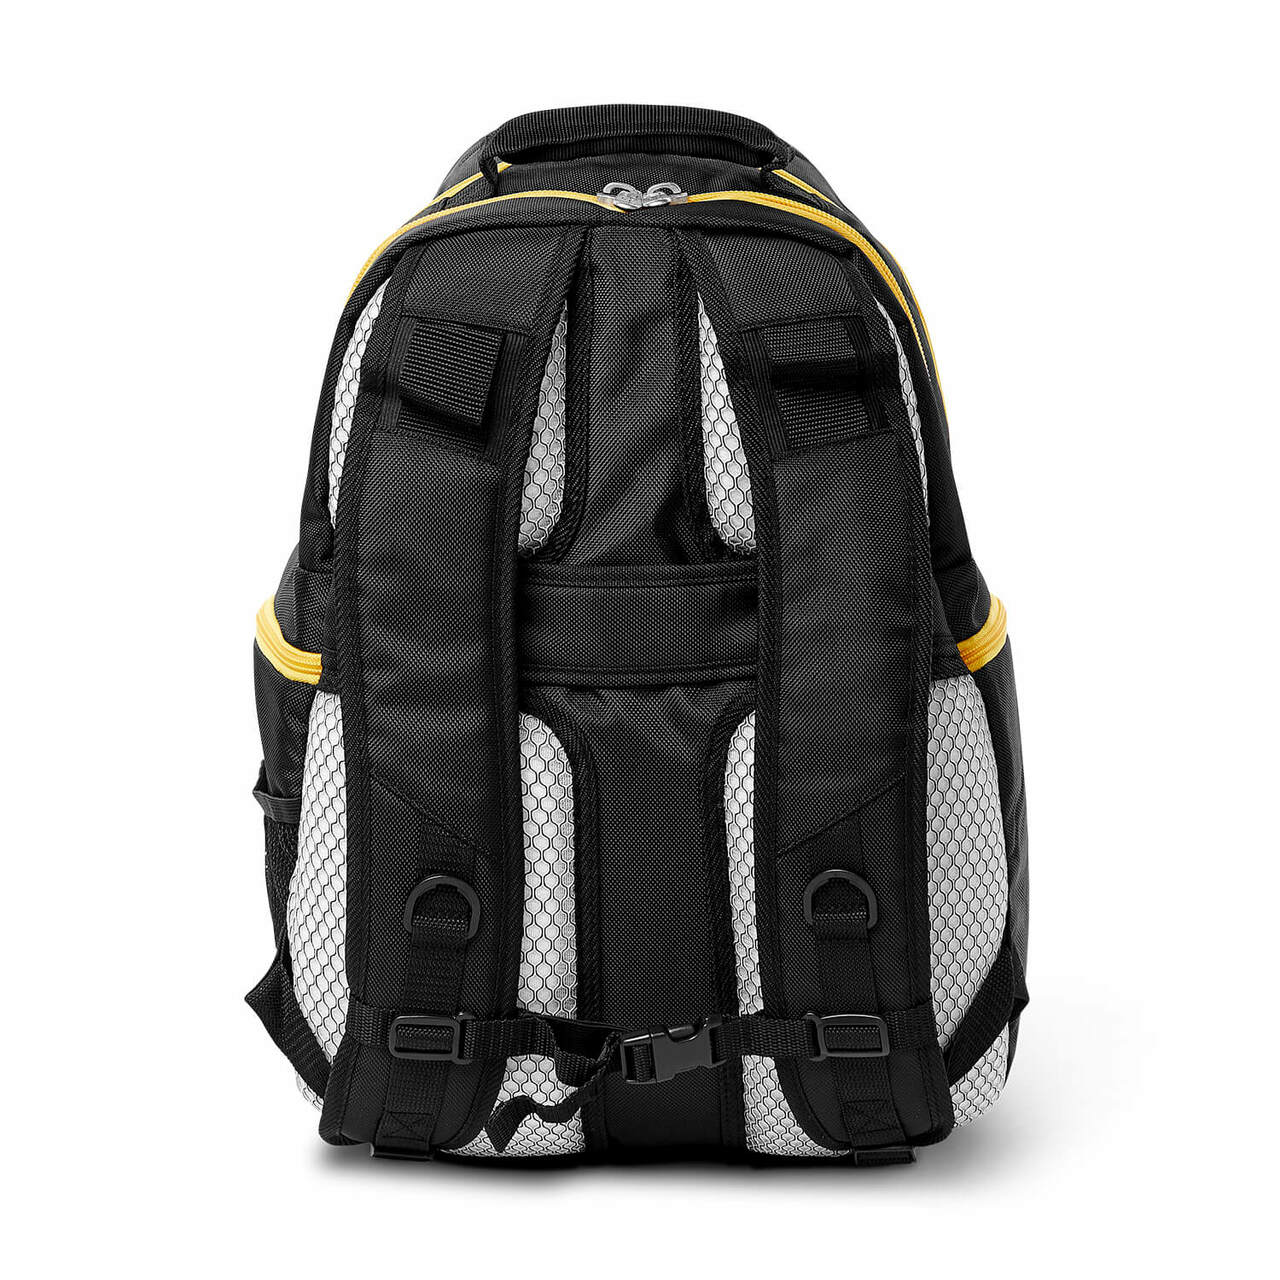 Cavaliers Backpack | Cleveland Cavaliers Laptop Backpack